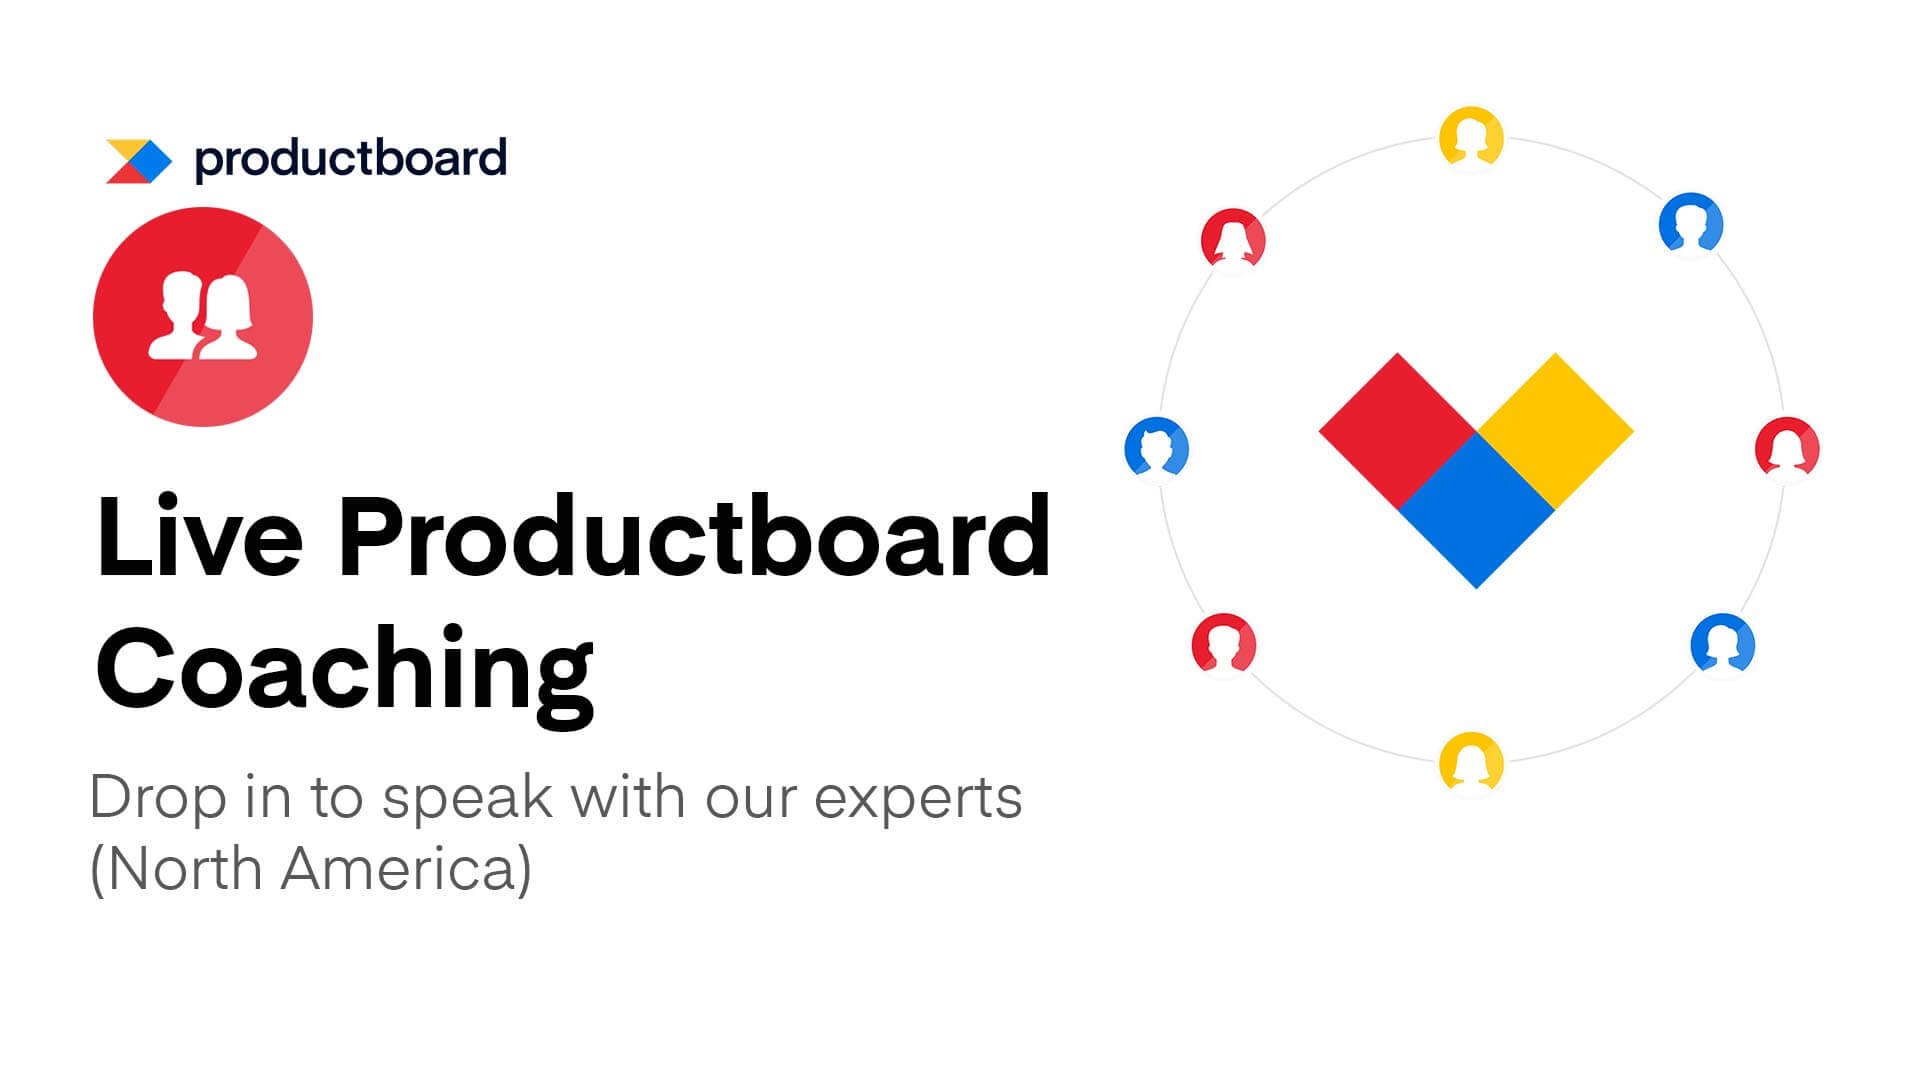 3/24 Live Productboard Coaching (North America)